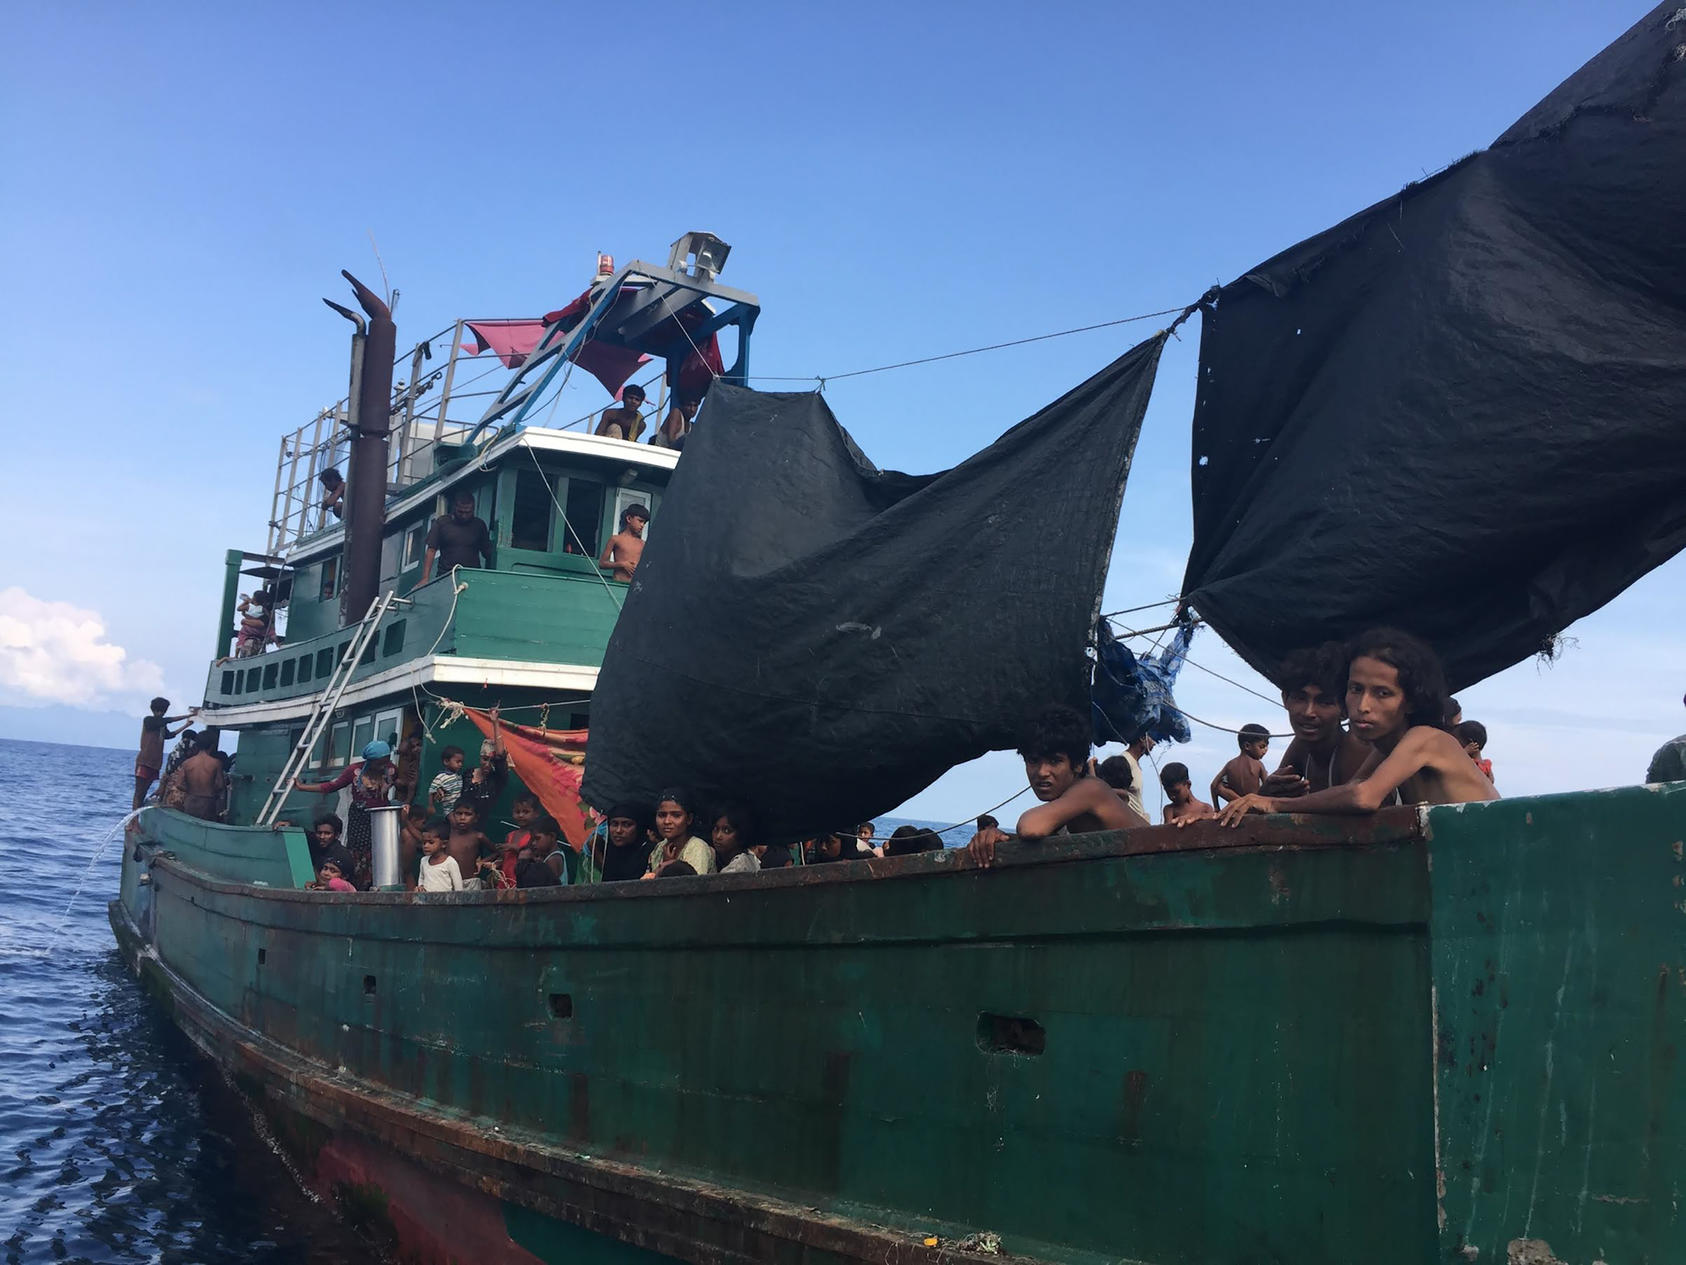 A wooden fishing boat carrying several hundred Rohingya migrants from Myanmar adrift west of the Thai mainland, May 14, 2015. The boat, which migrants said that they had been on for three months, was part of an exodus in which thousands of people have taken to the sea in recent weeks but no country has been willing to take them in. (Thomas Fuller/The New York Times)